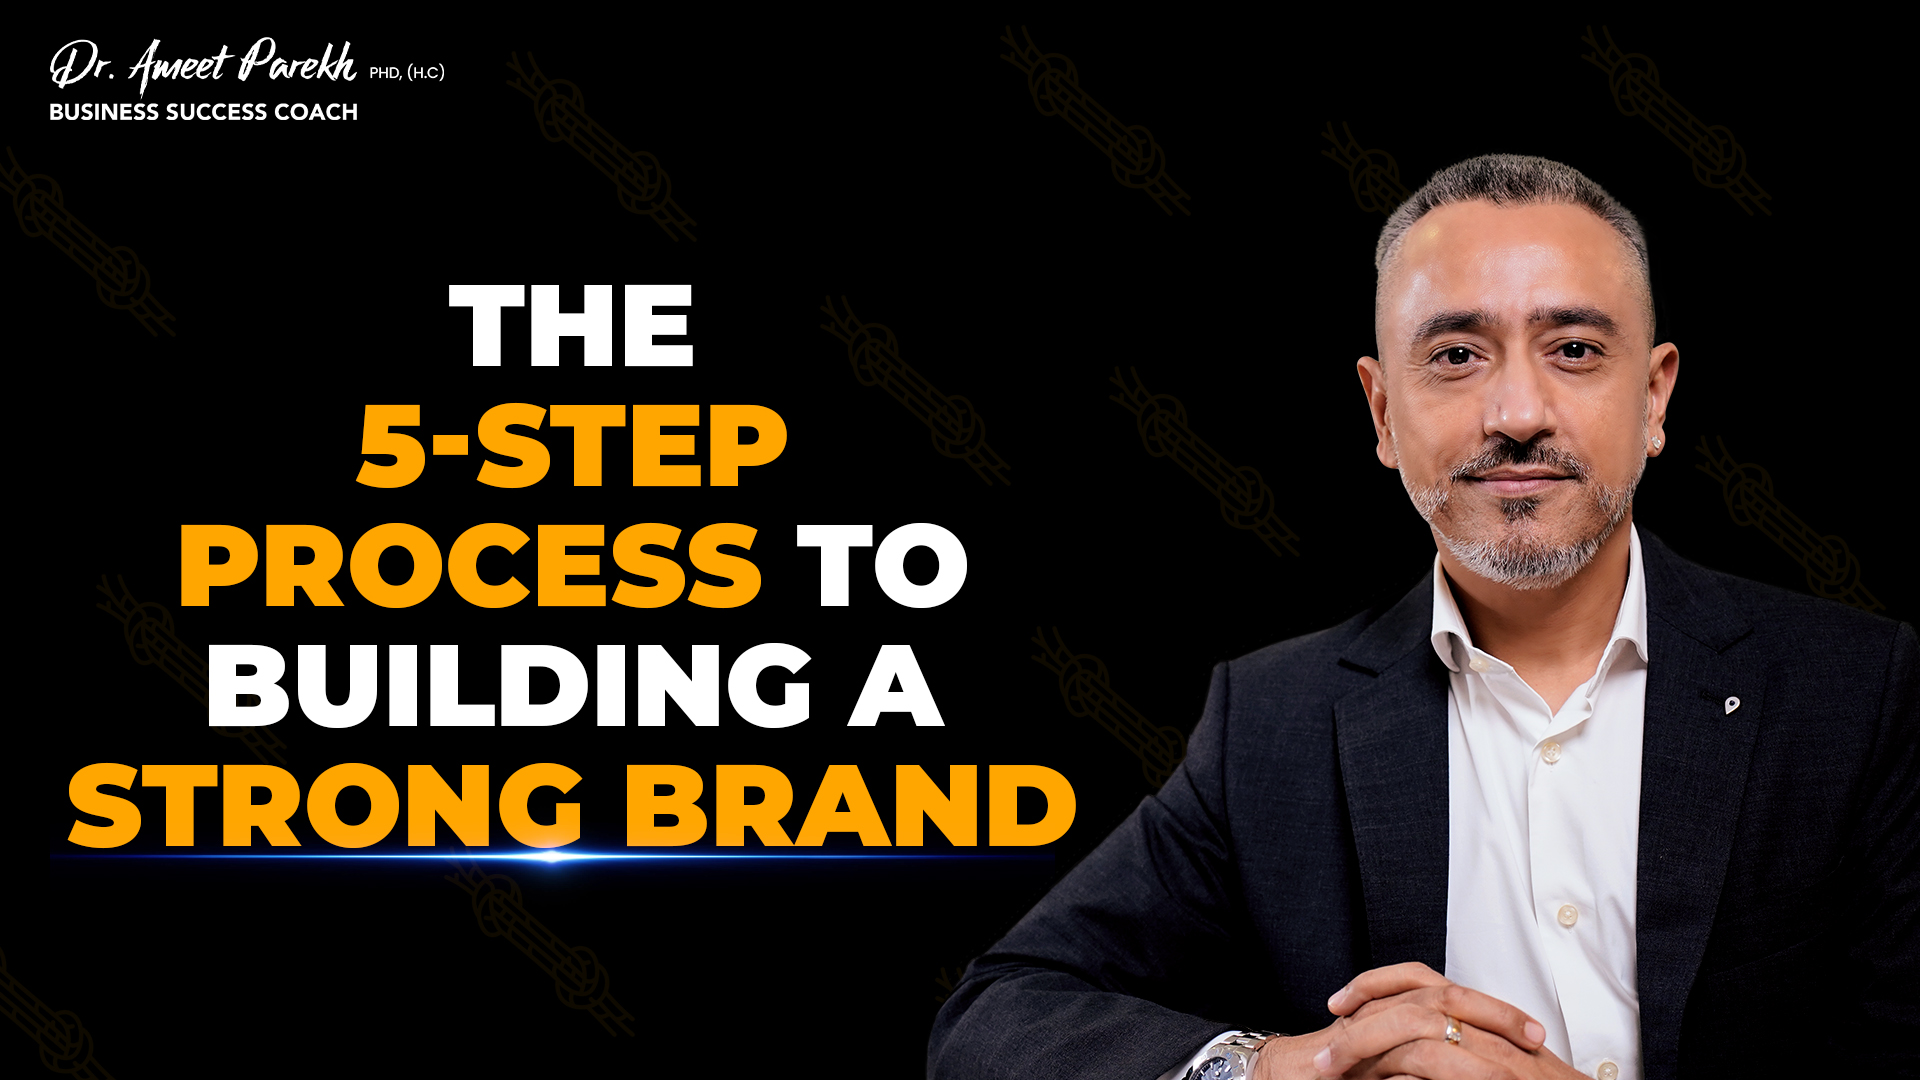 THE 5 STEP PROCESS TO BUILDING A STRONG BRAND